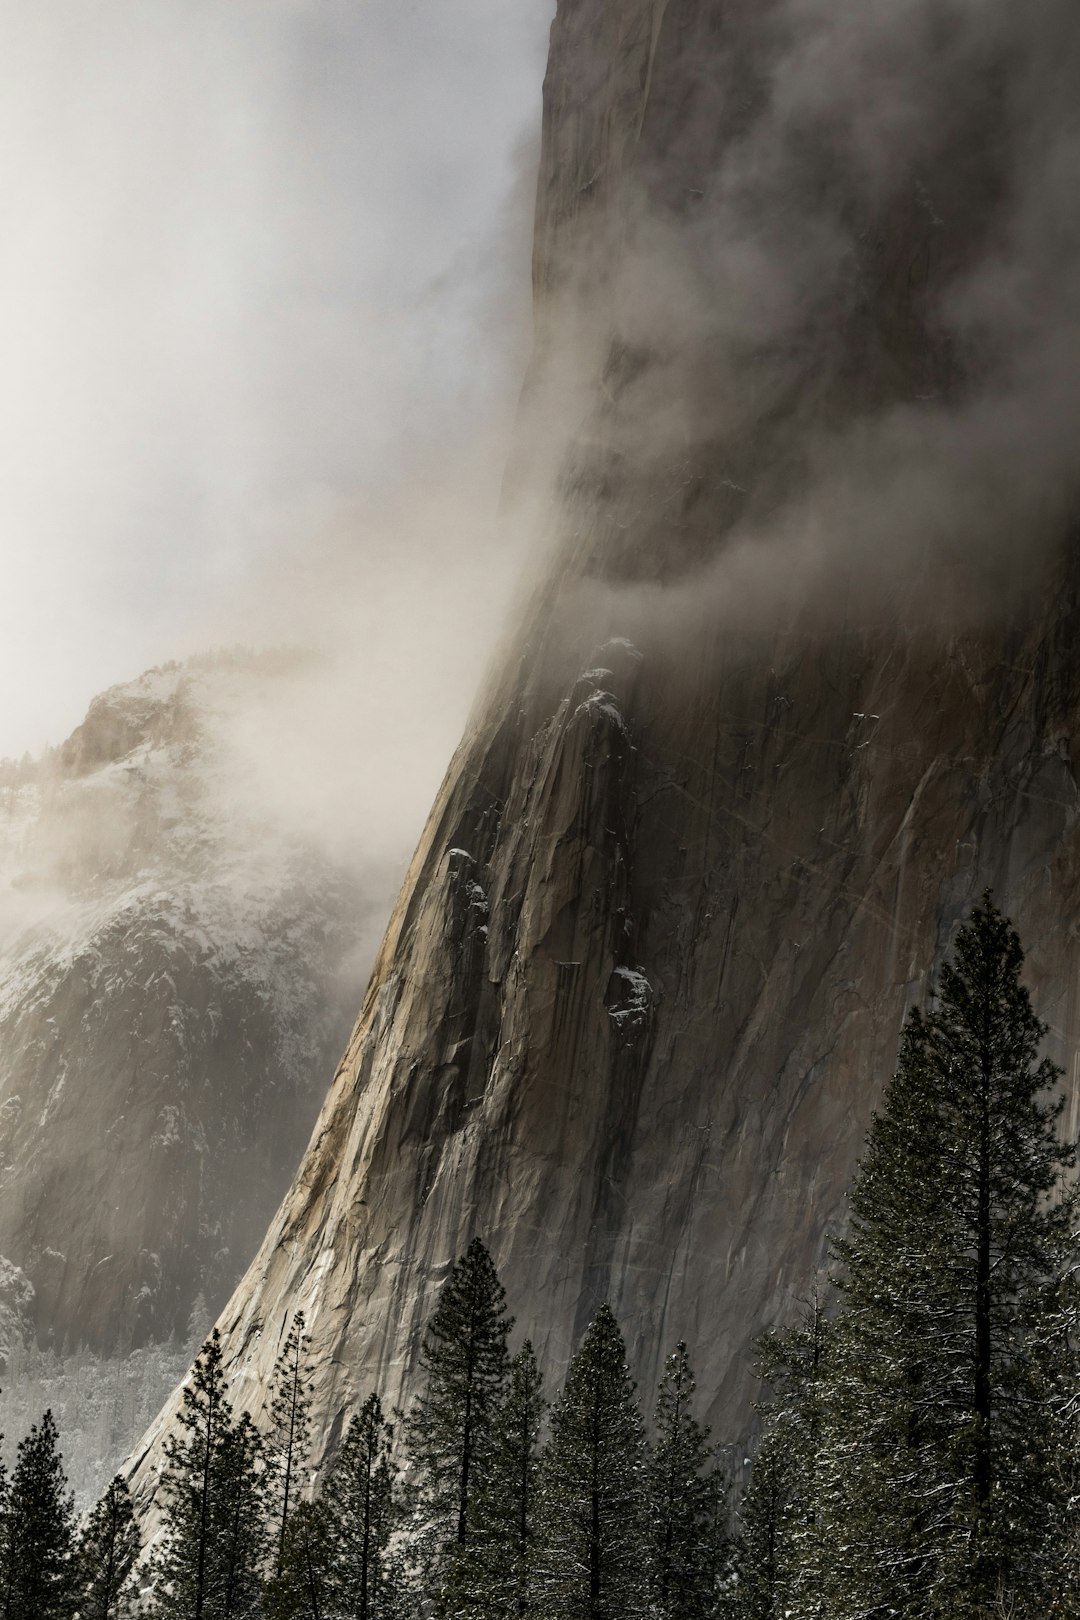 El Cap standing tall during the winter months…You forget how tall it is once the clouds swallow the slab, but once it is revealed once again its like seeing something new all over again.